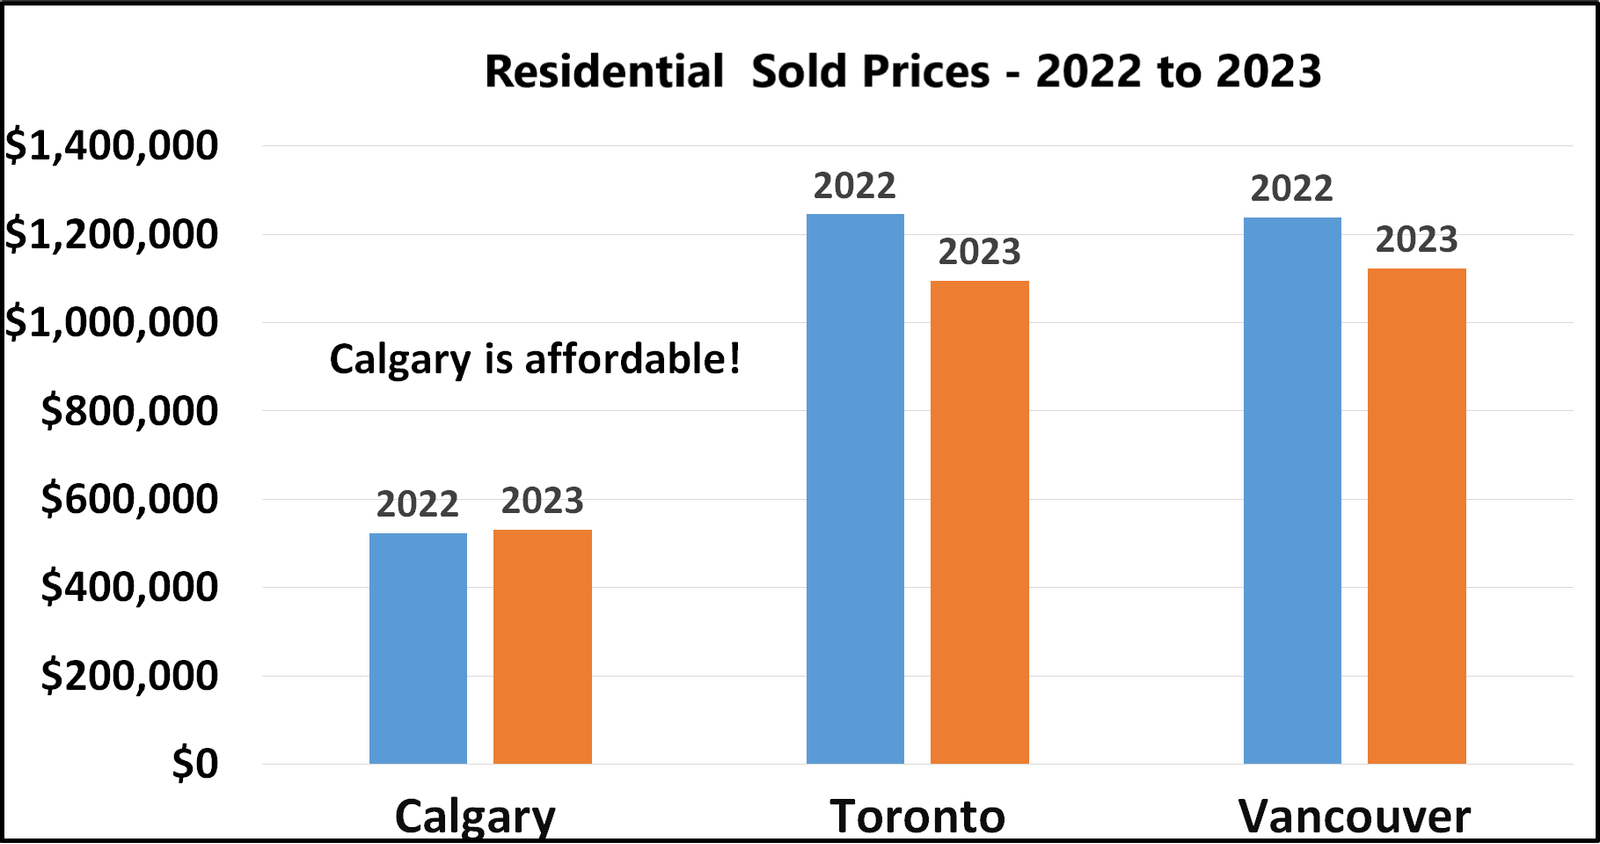 Calgary Affordability Advantage! Why would you move to Calgary?